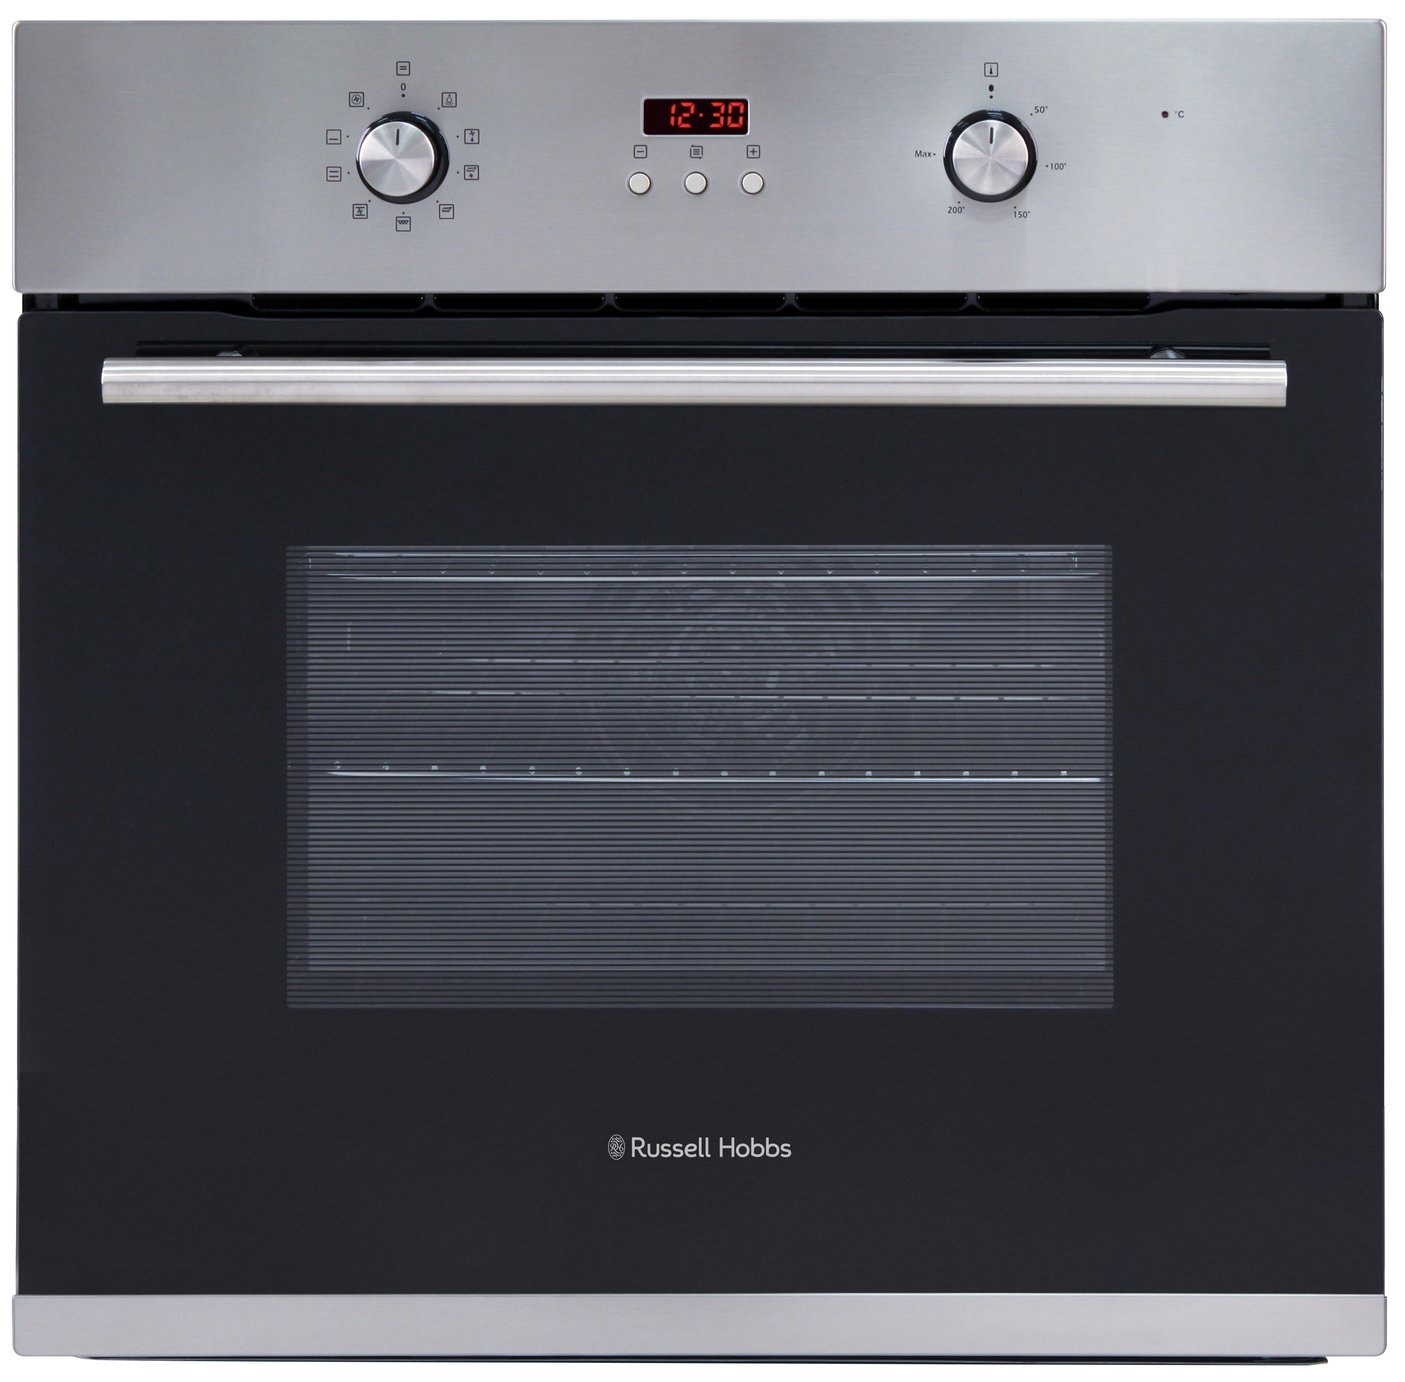 Russell Hobbs RHEO6501SS Electric Oven review